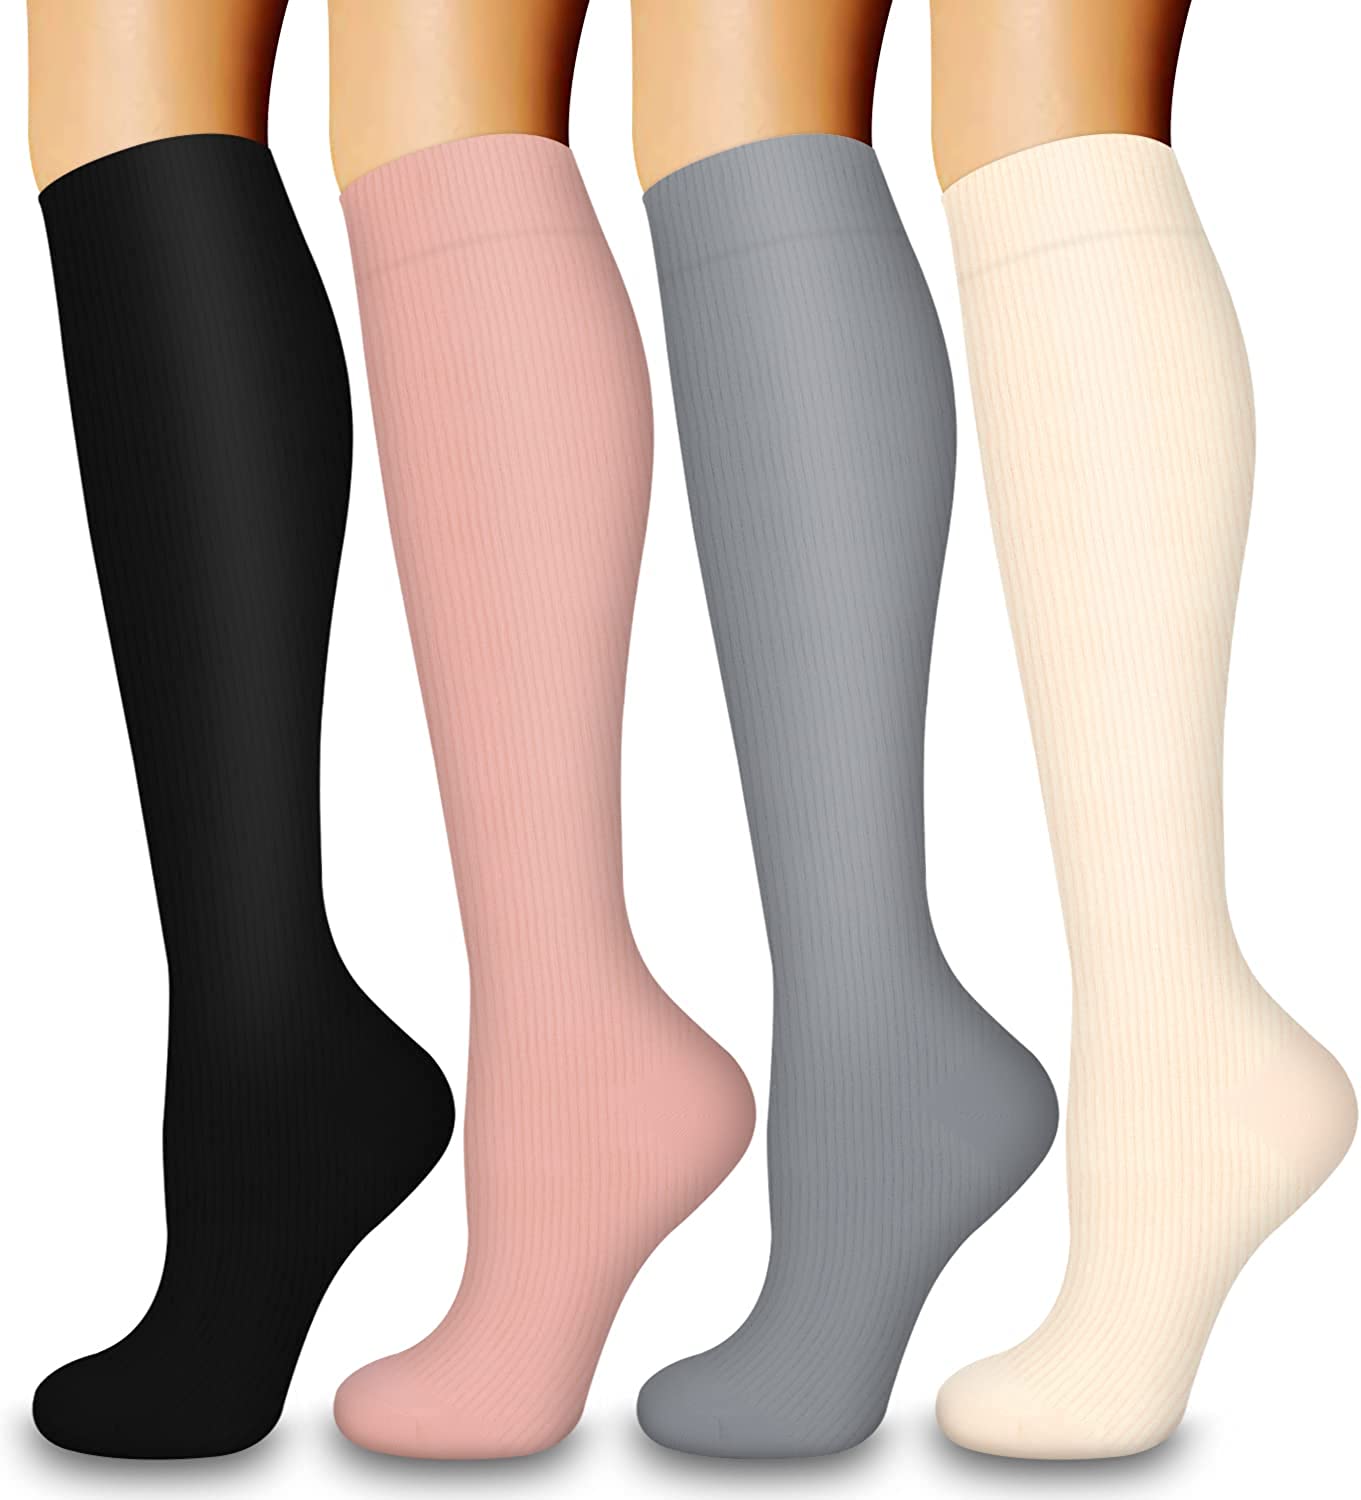 Laite Hebe 4 Pairs-Compression Socks for Women&Men Circulation-Best Support  for